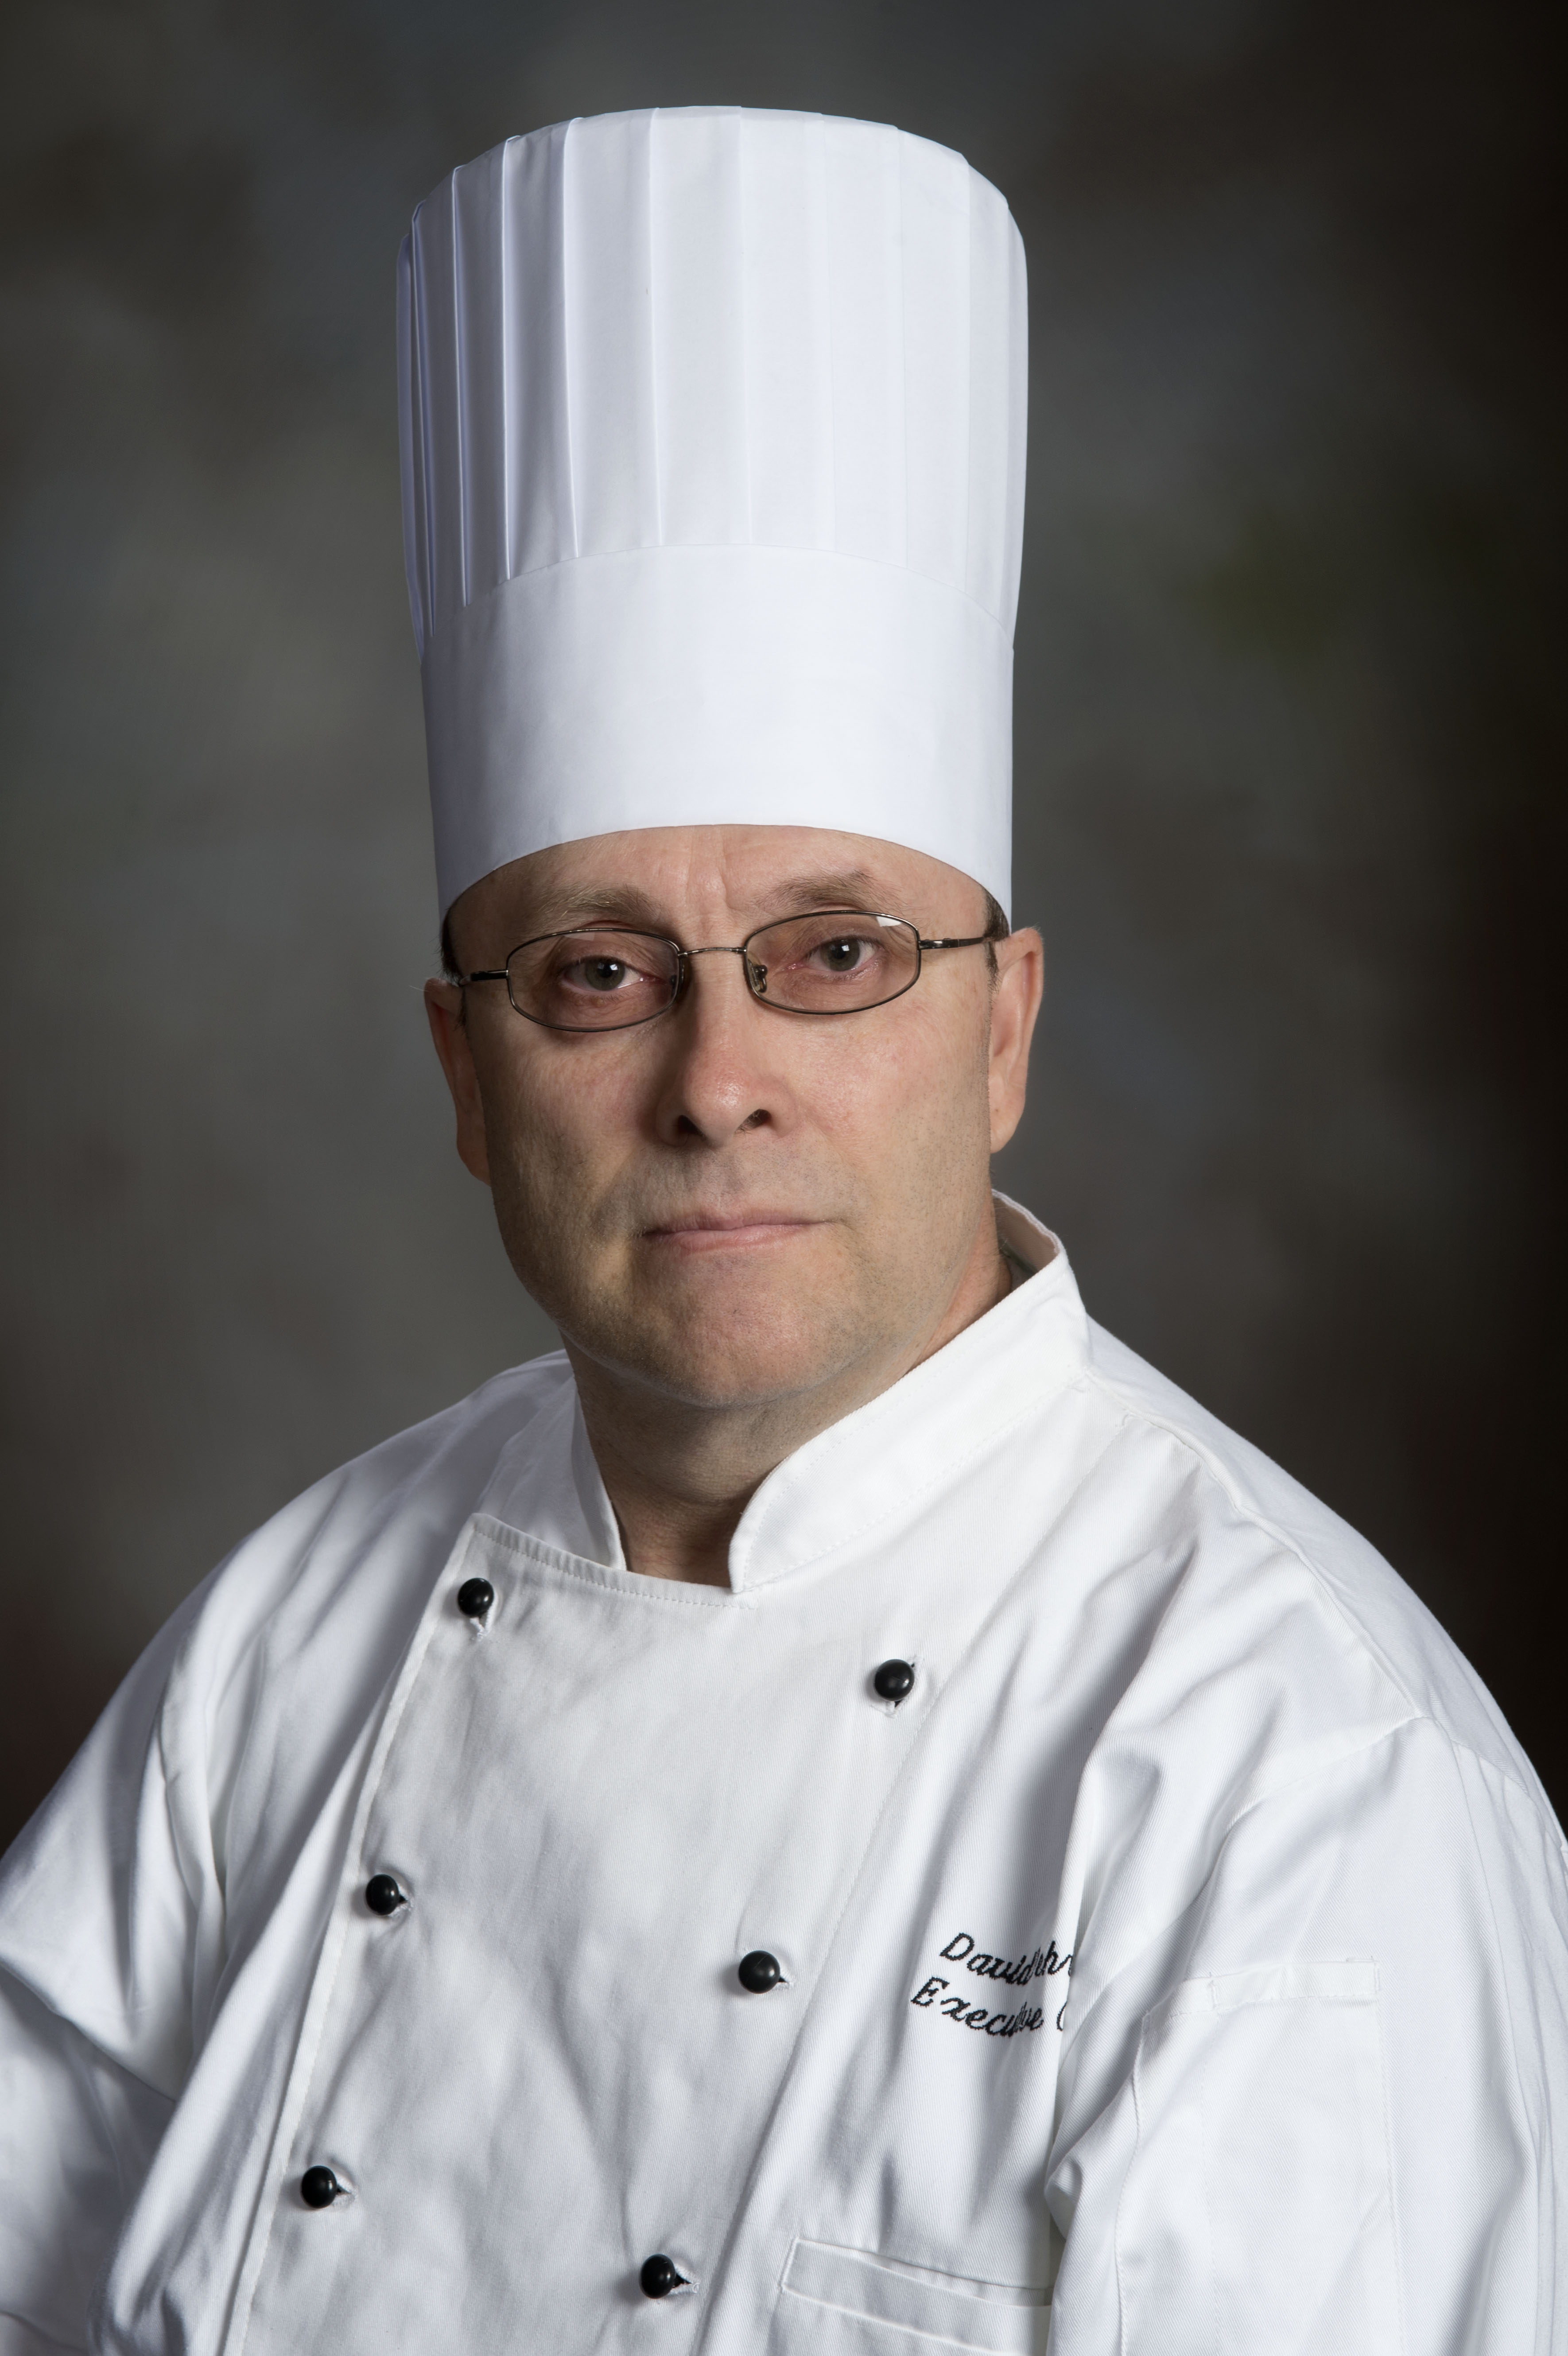 David Oehring, new executive chef -Inn at Virginia Tech and Skelton Conference Center